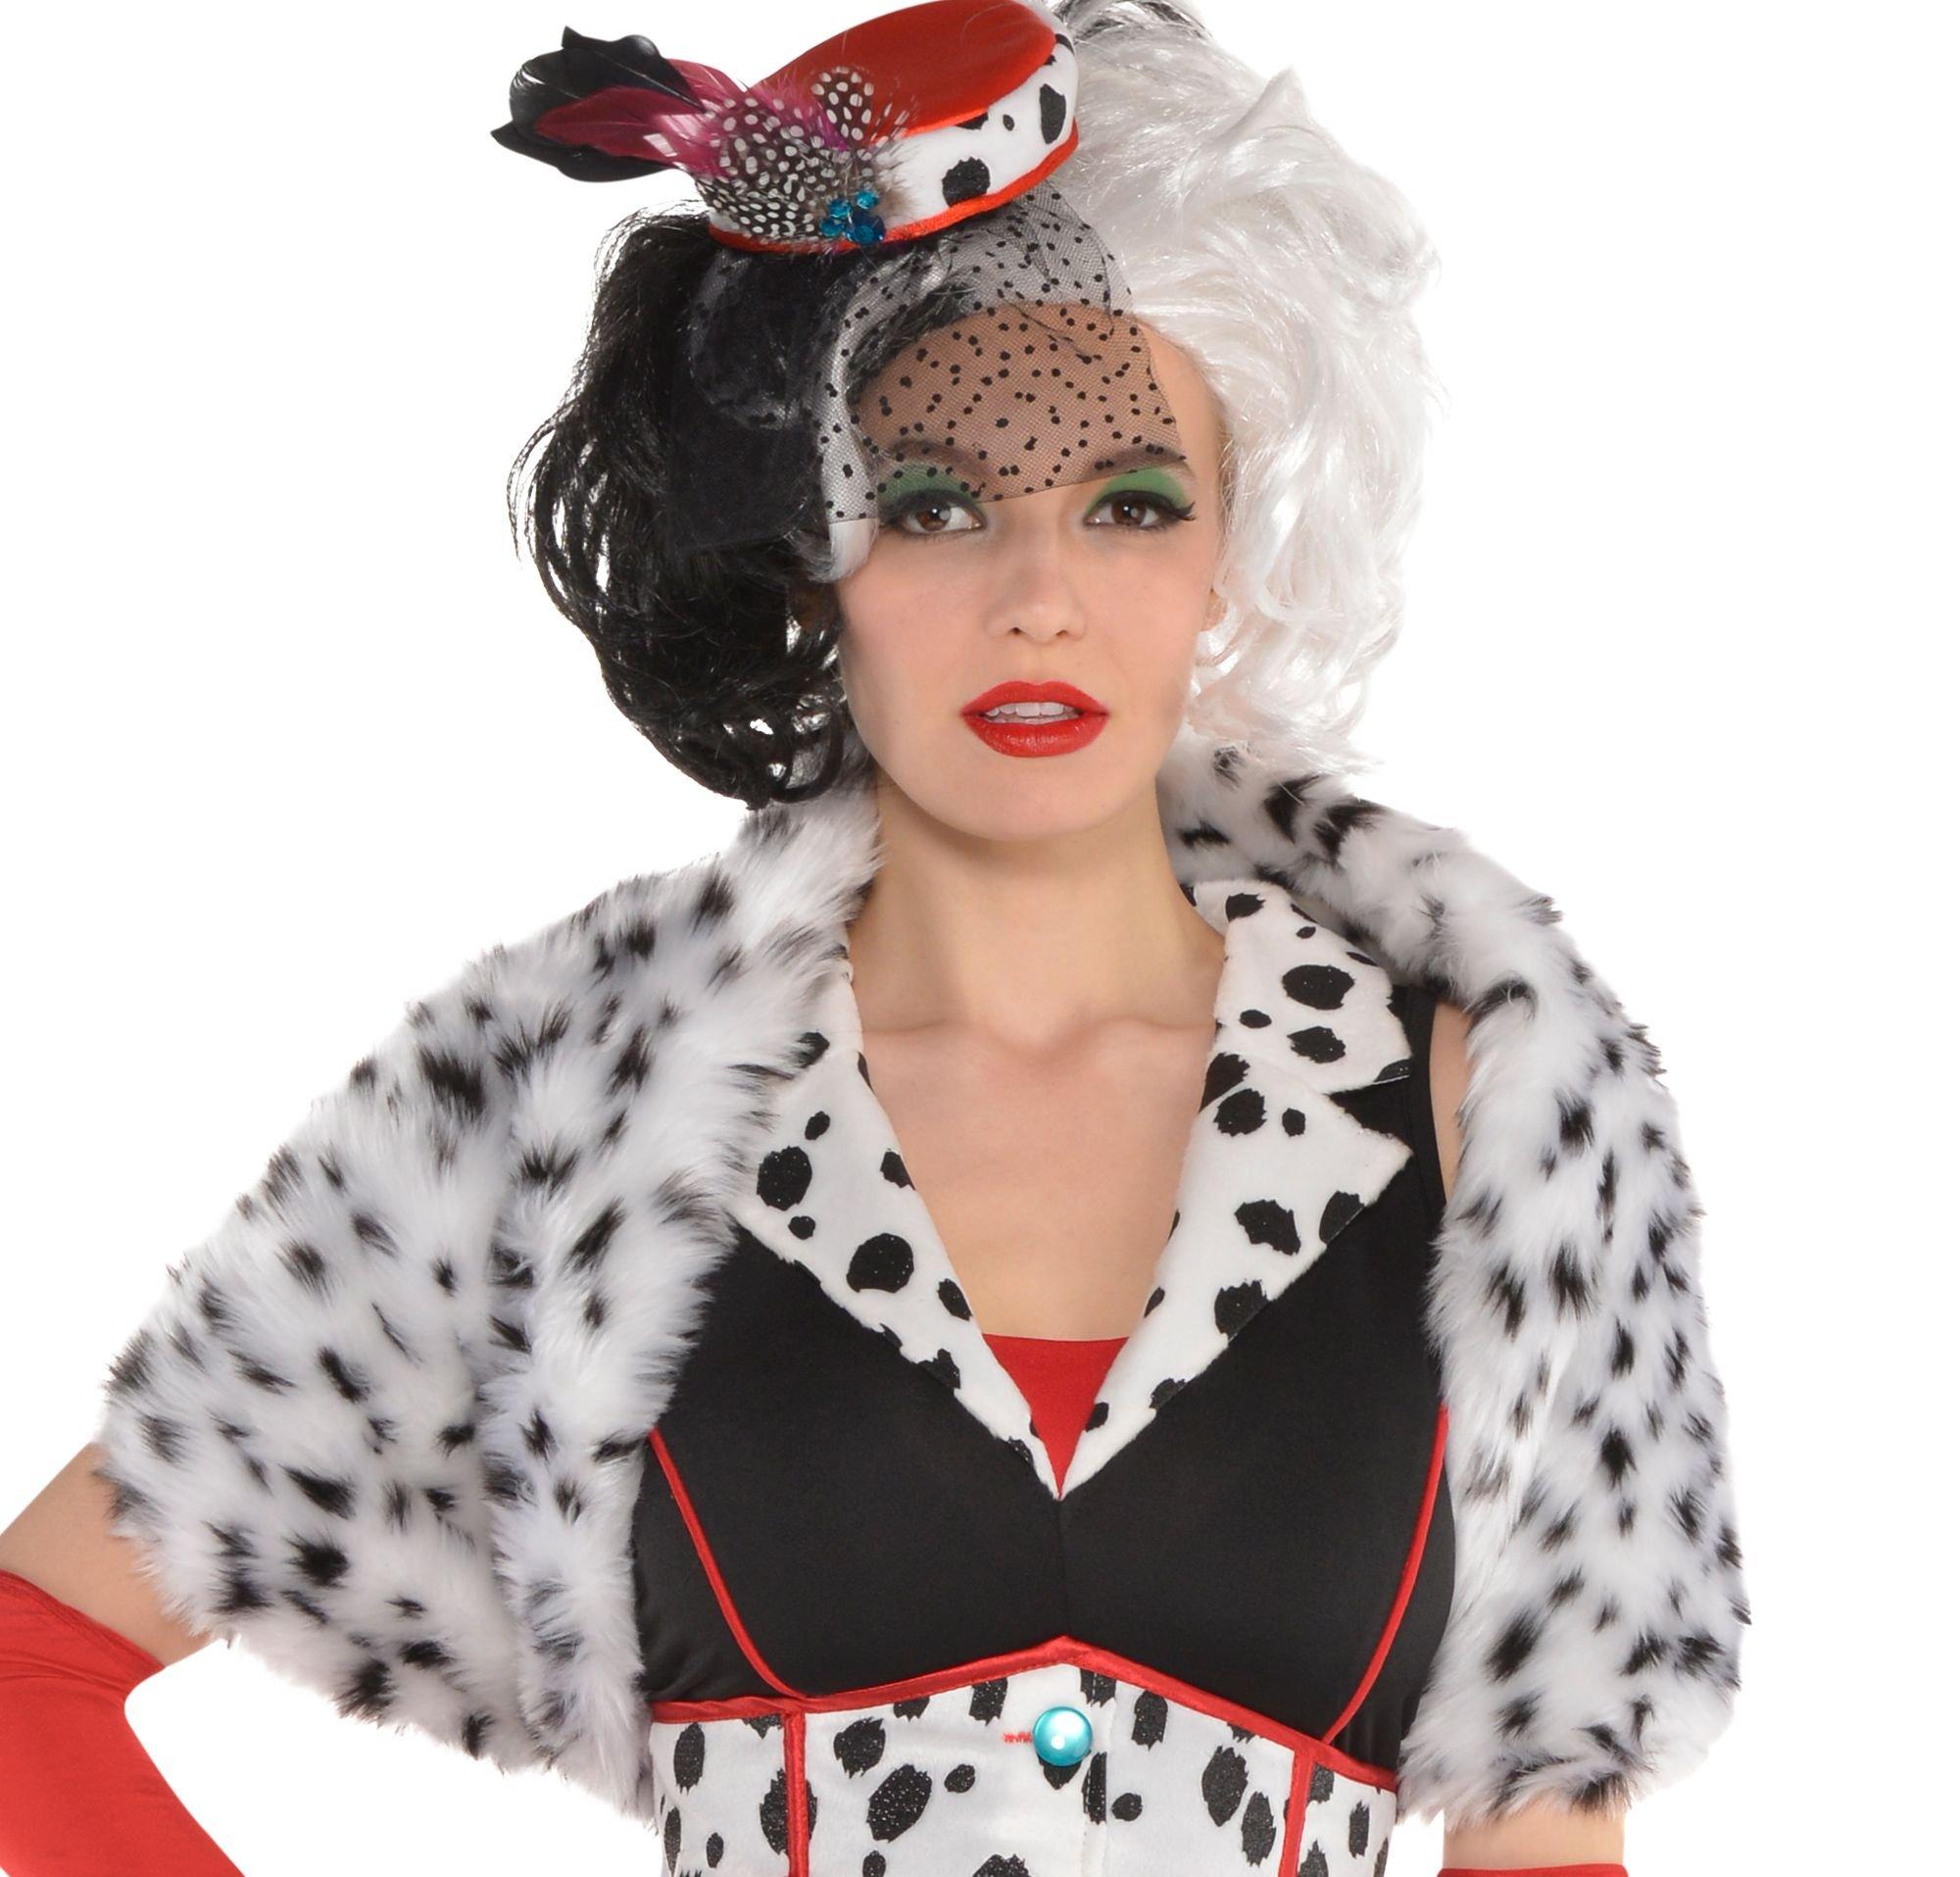 Adult and Youth Cruella Fashions Now Available on shopDisney